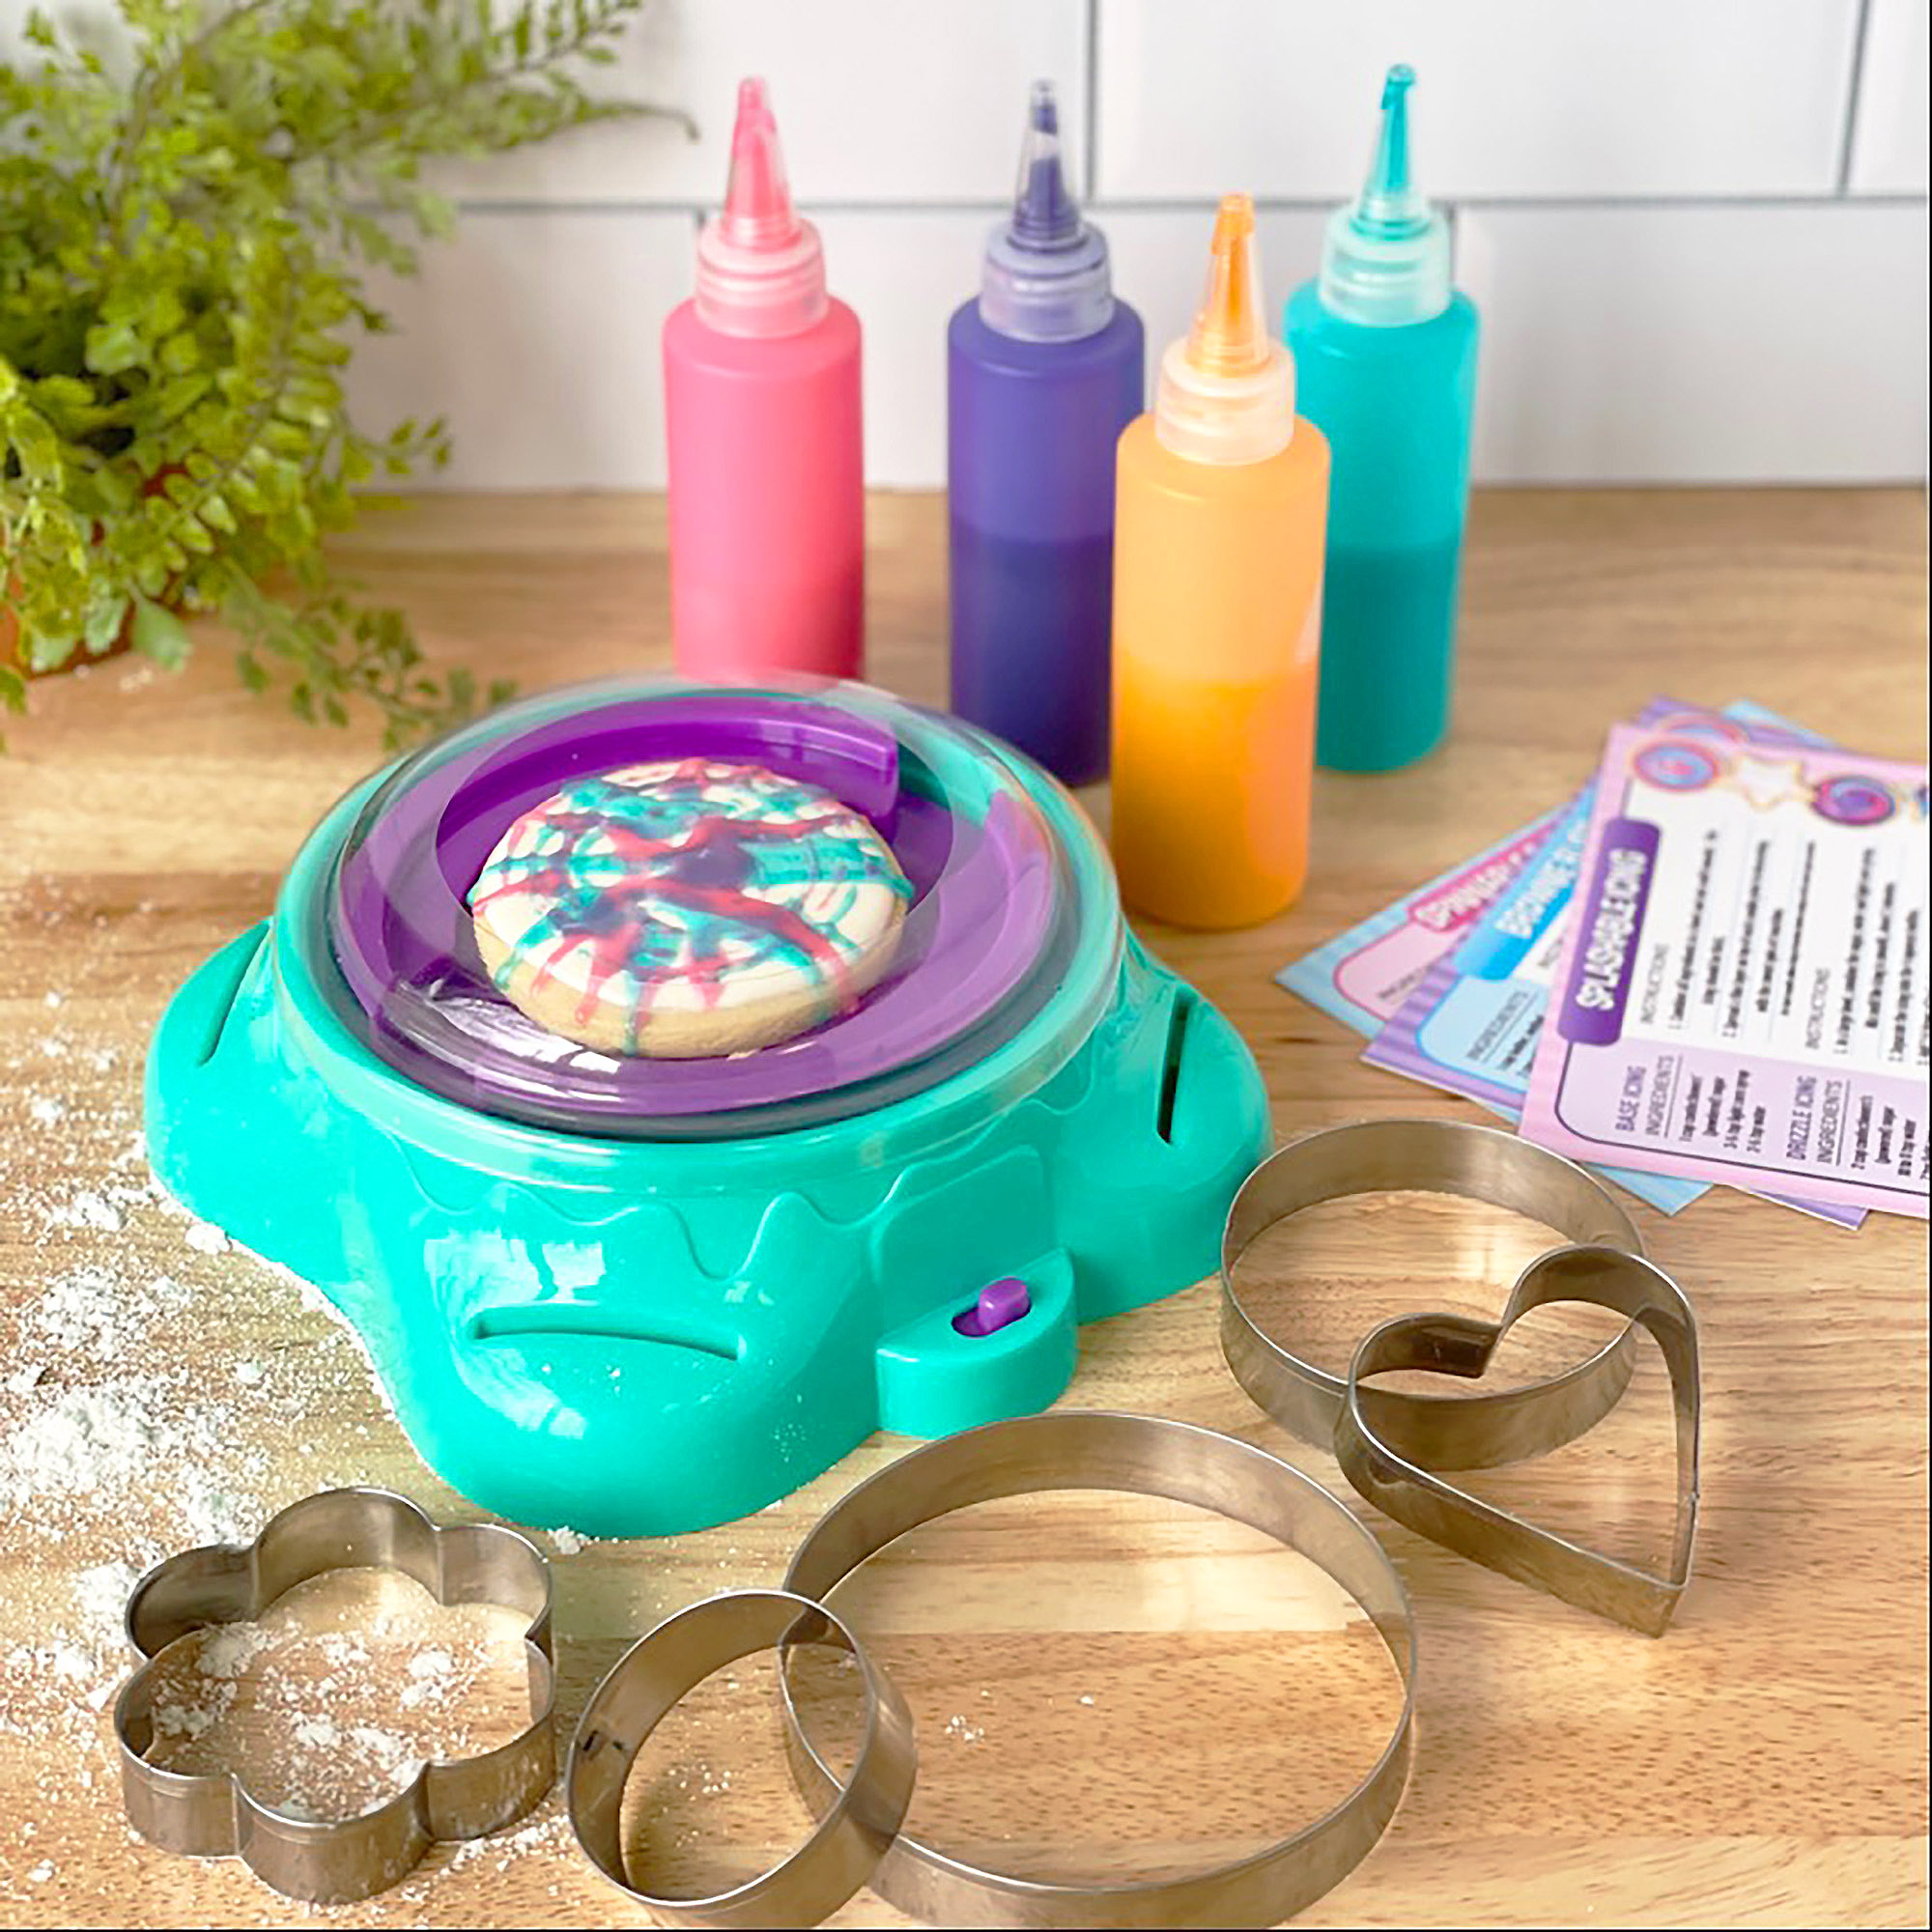 ArtSkills Sweet Spin Art, Includes Cookie Cutters and Recipe Cards, 17 Pc 